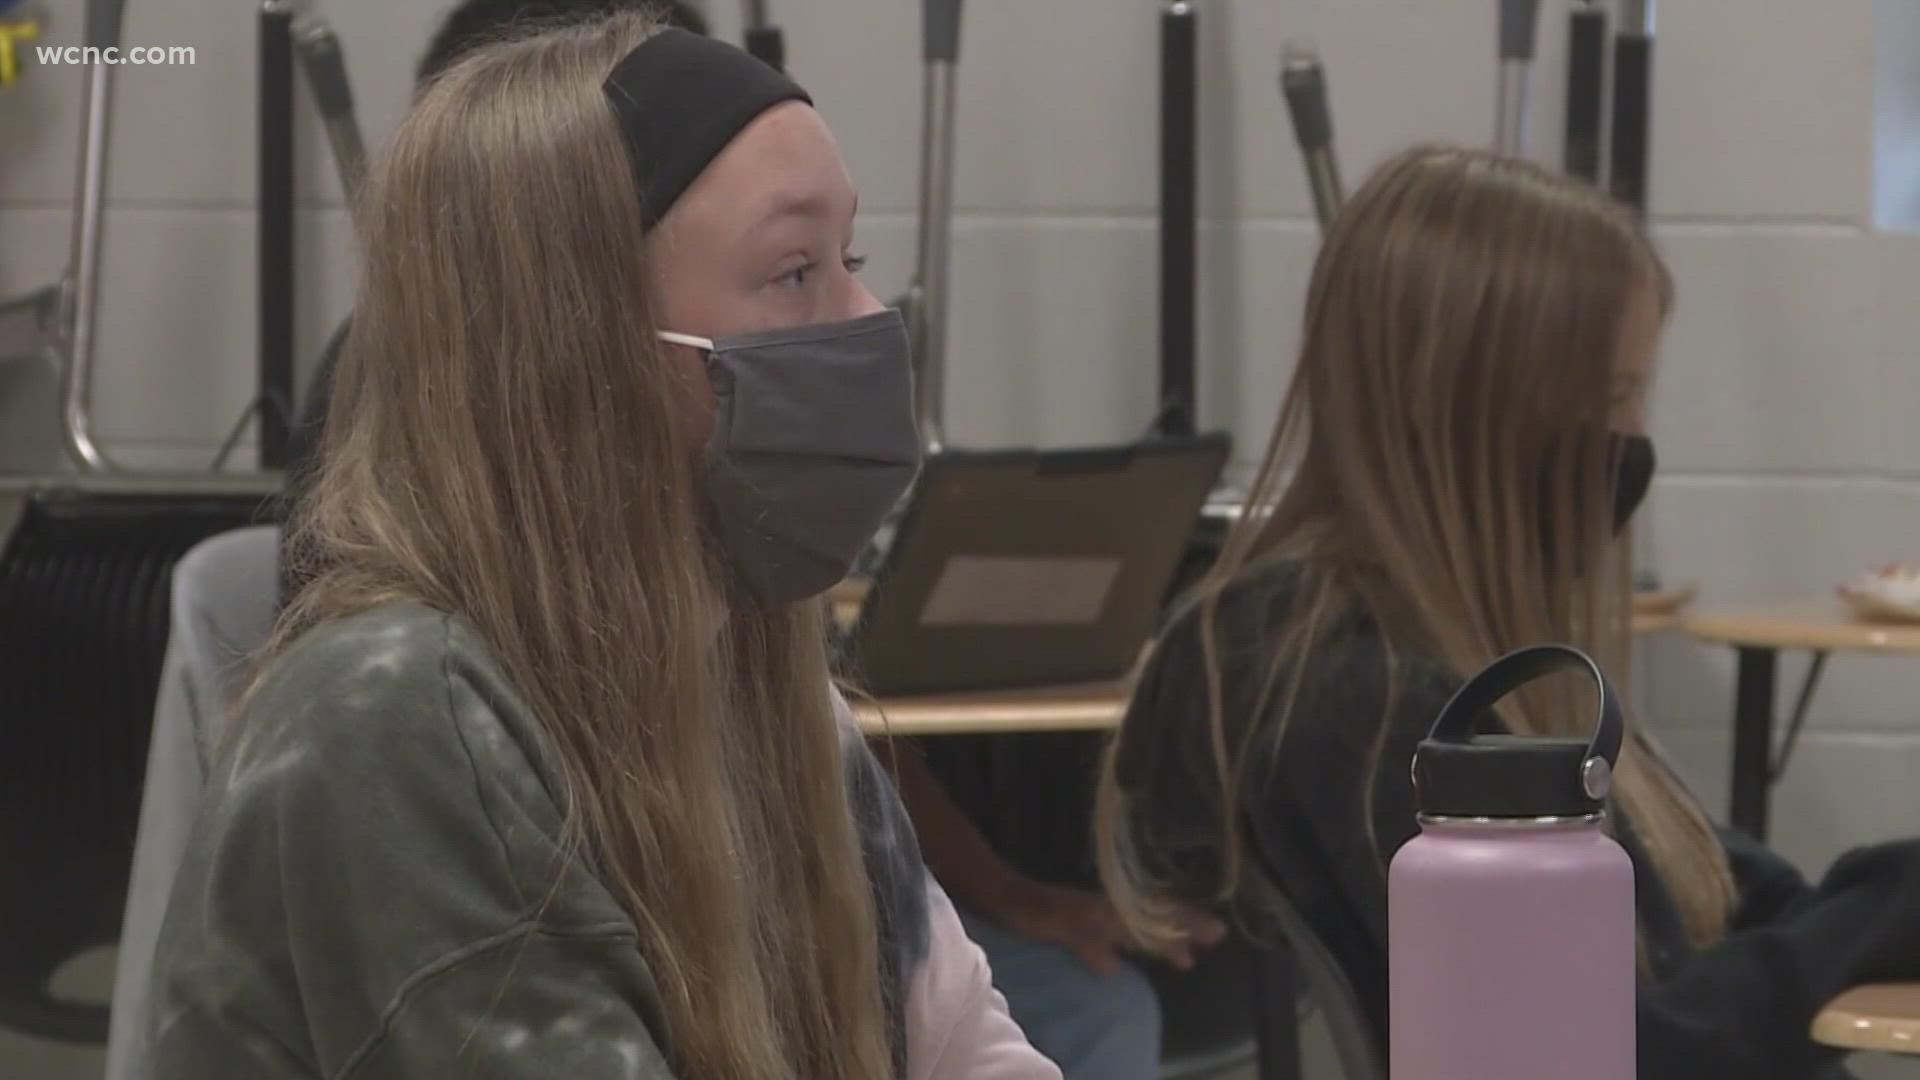 Masks are still required in Gaston County Schools after the school board voted Monday night to keep the mask mandate in place.